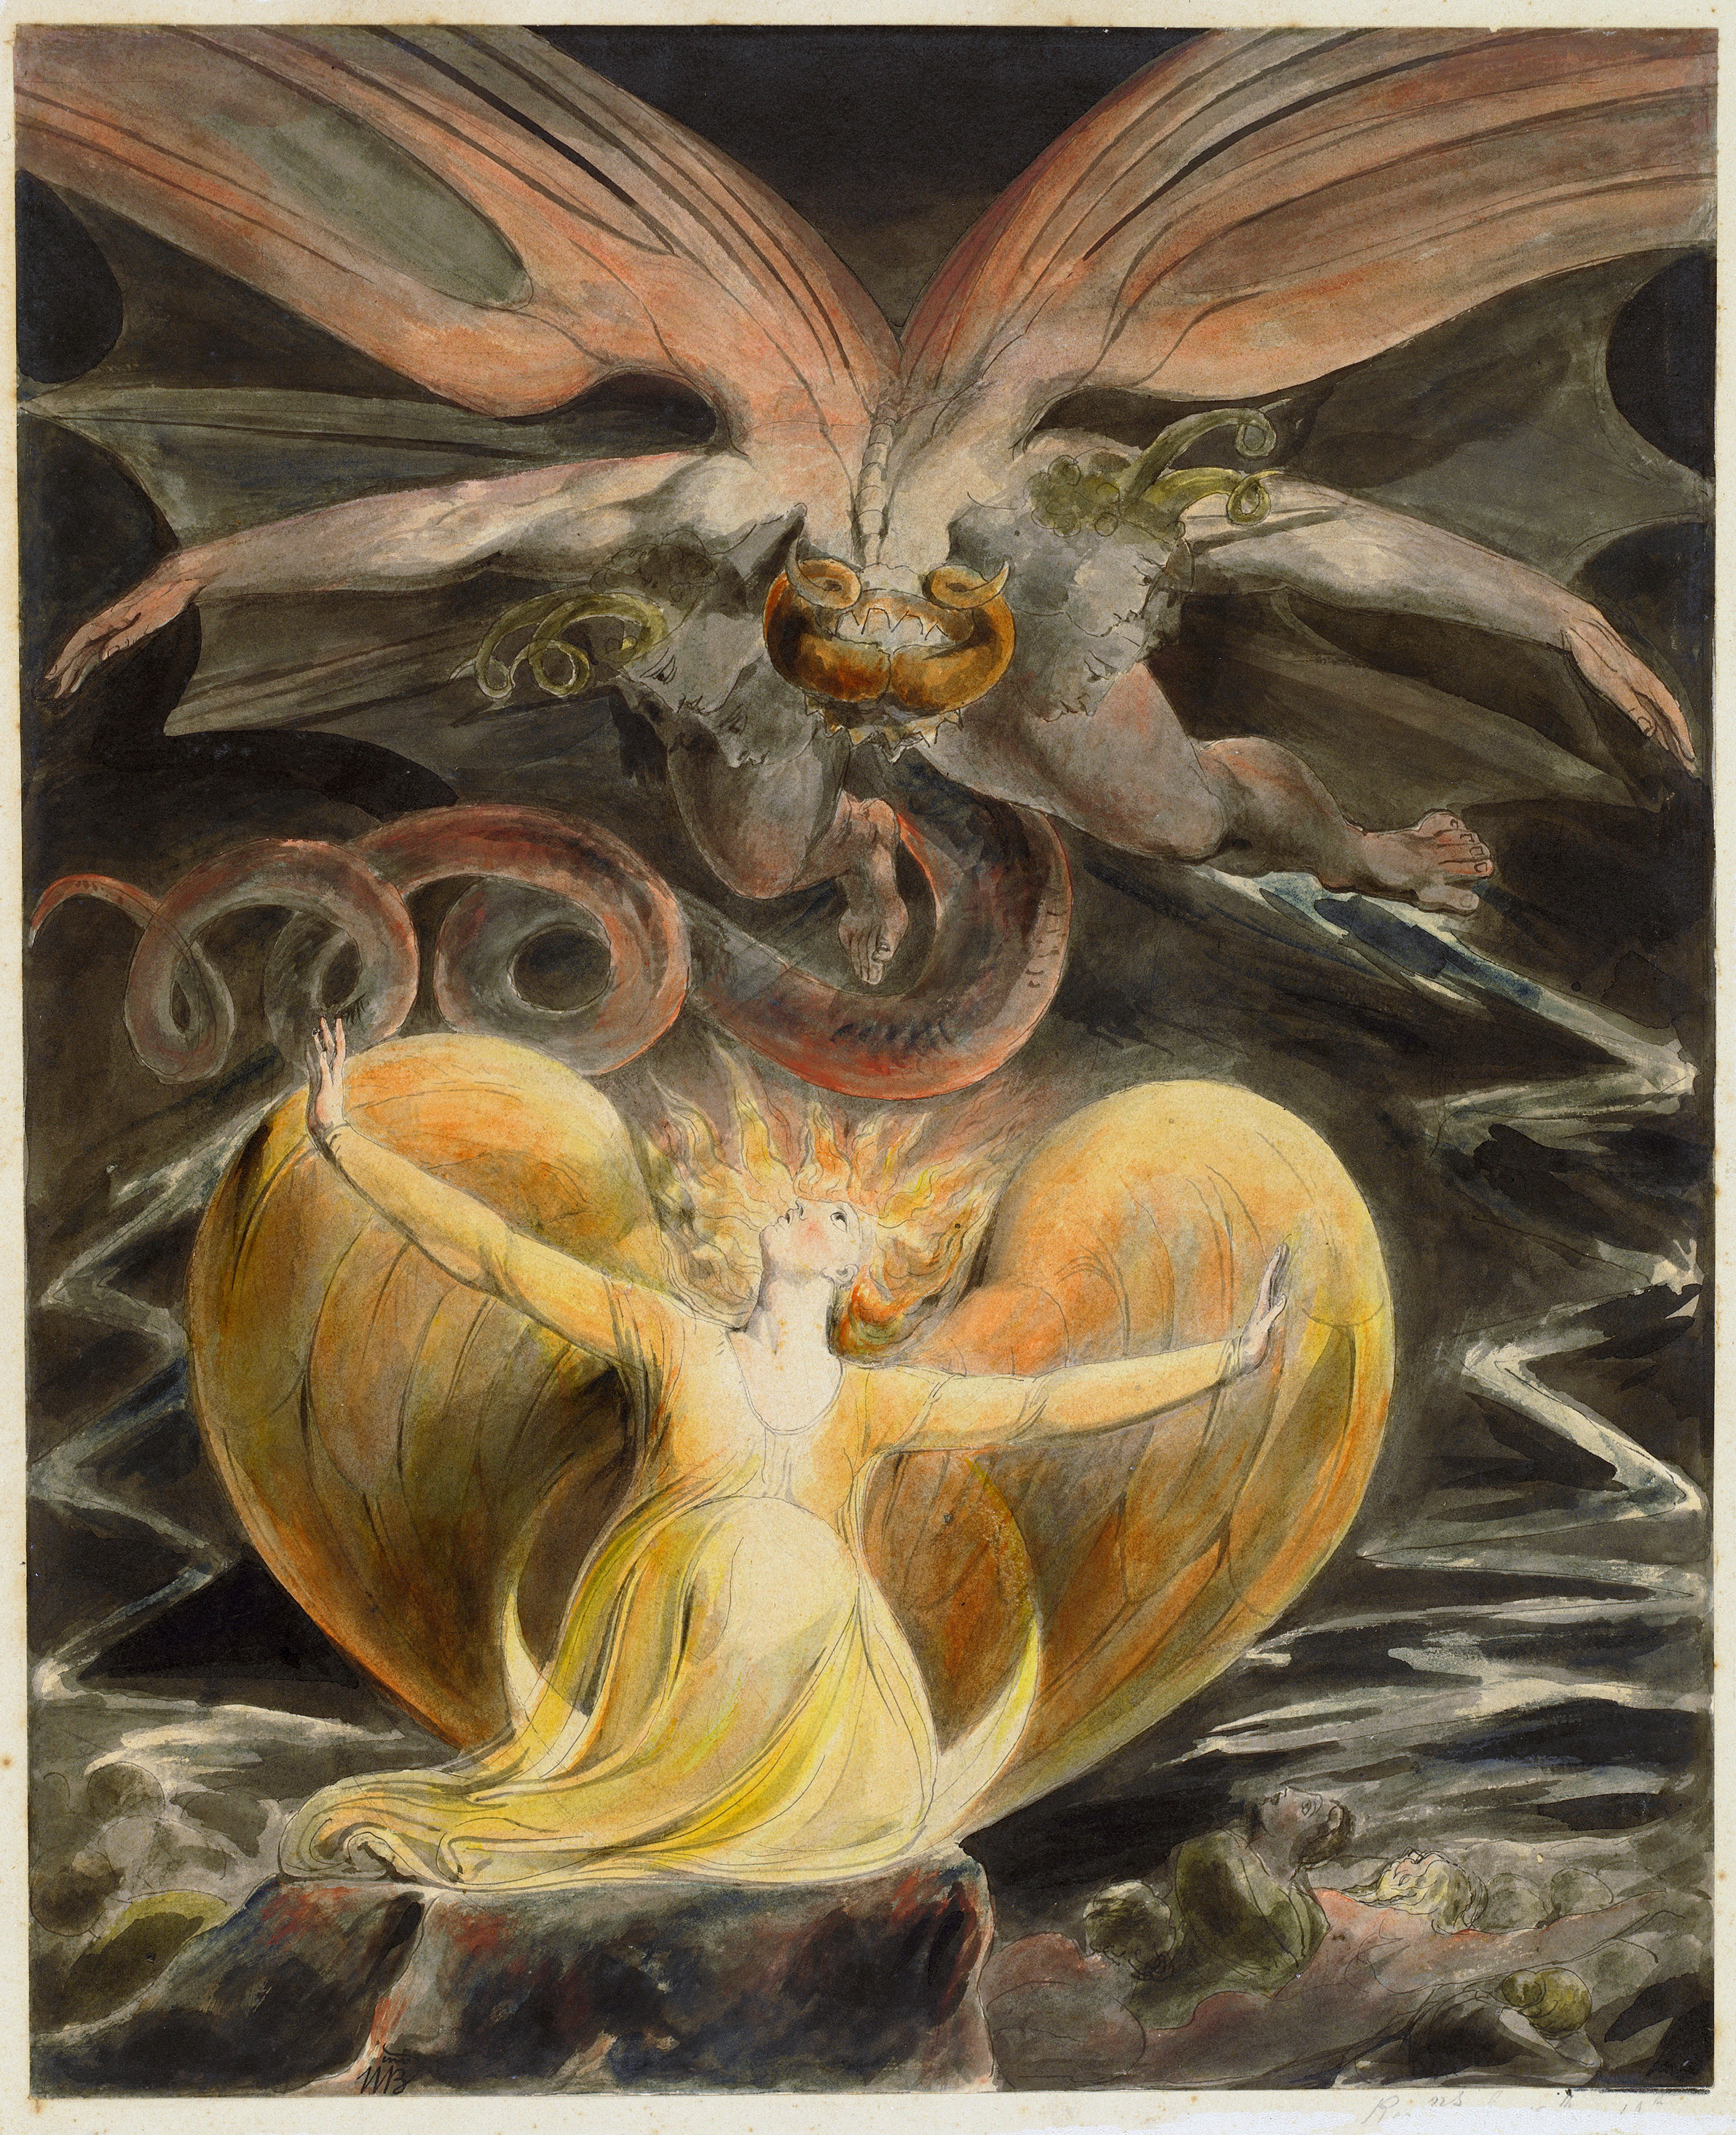 The Great Red Dragon and the Woman Clothed with the Sun by William Blake - 1805 - 40.8 x 33.7 cm National Gallery of Art